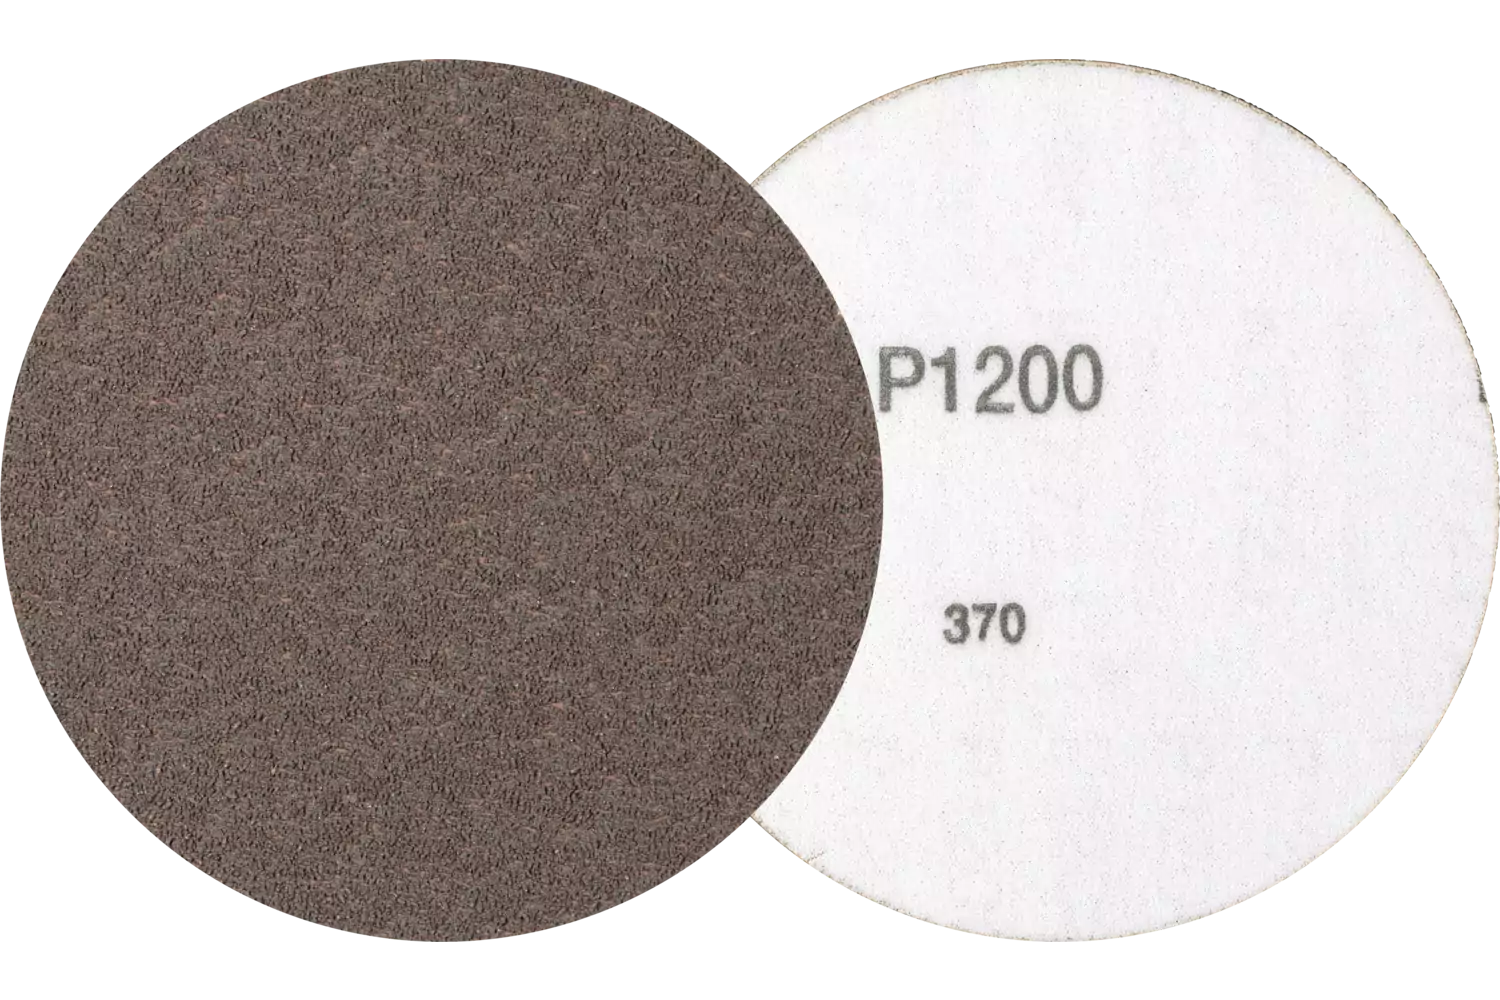 Compact grain self-adhesive disc KR dia. 125 mm A1200 CK for fine grinding with an angle grinder 1